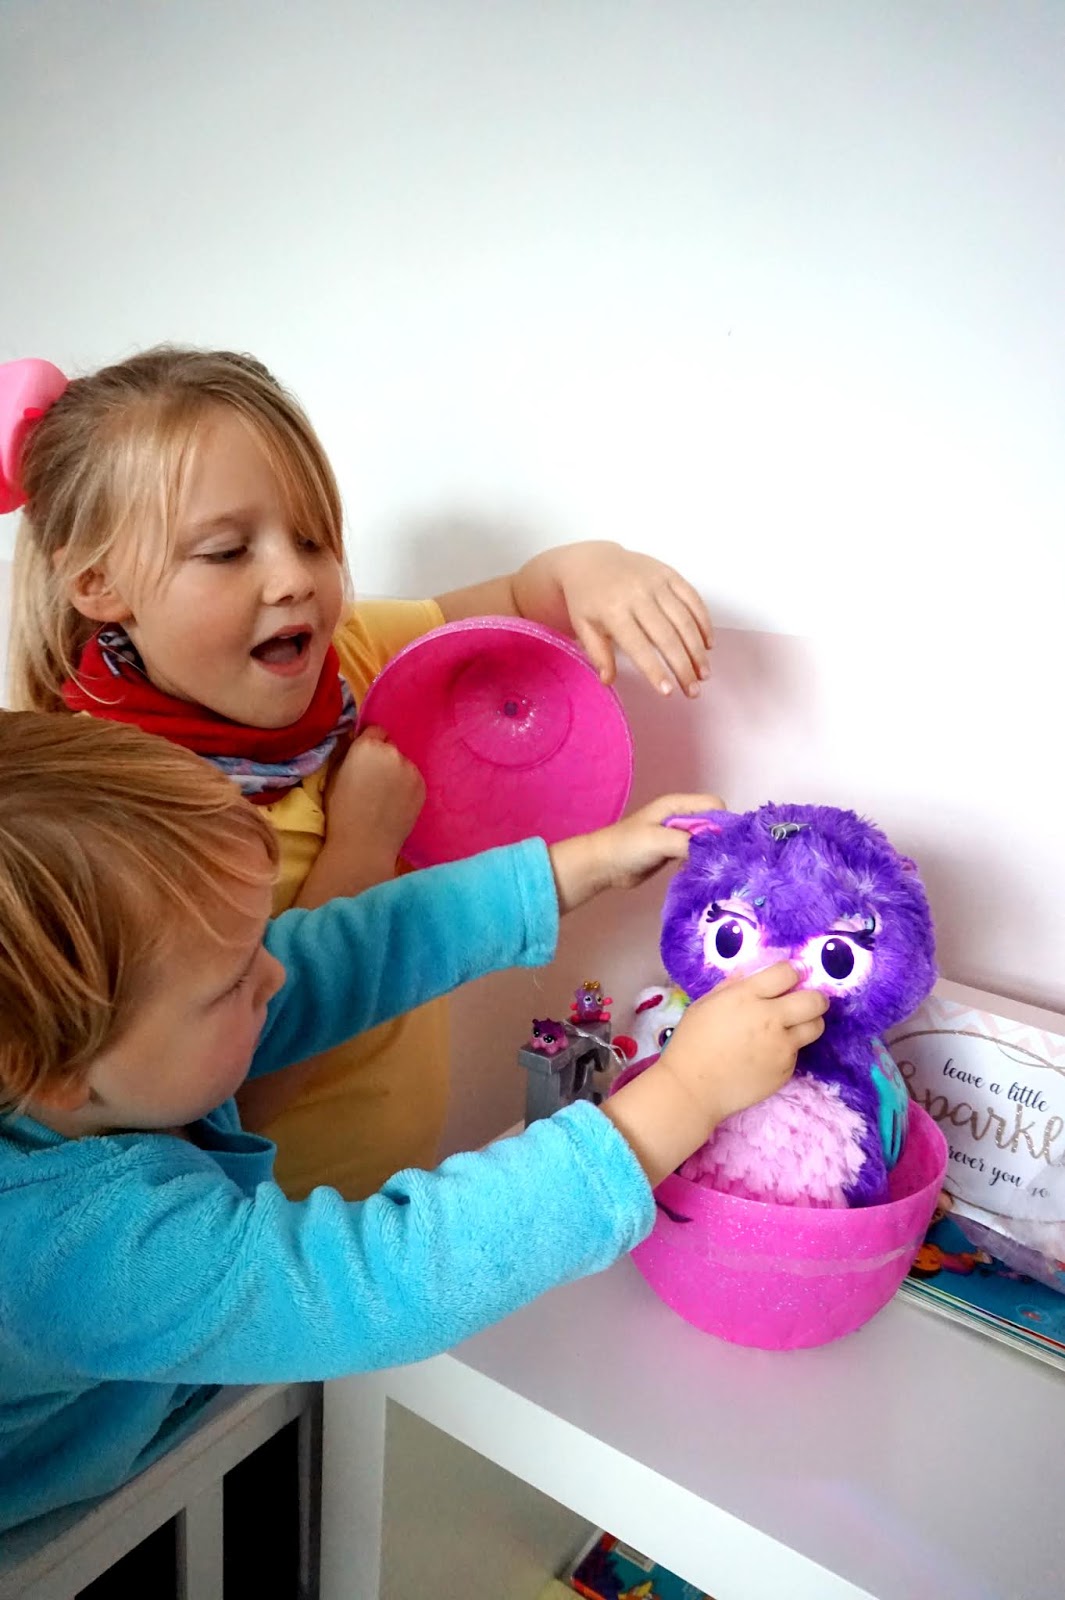 Hatchimals WOW Review - How The Hatchimals WOW Works